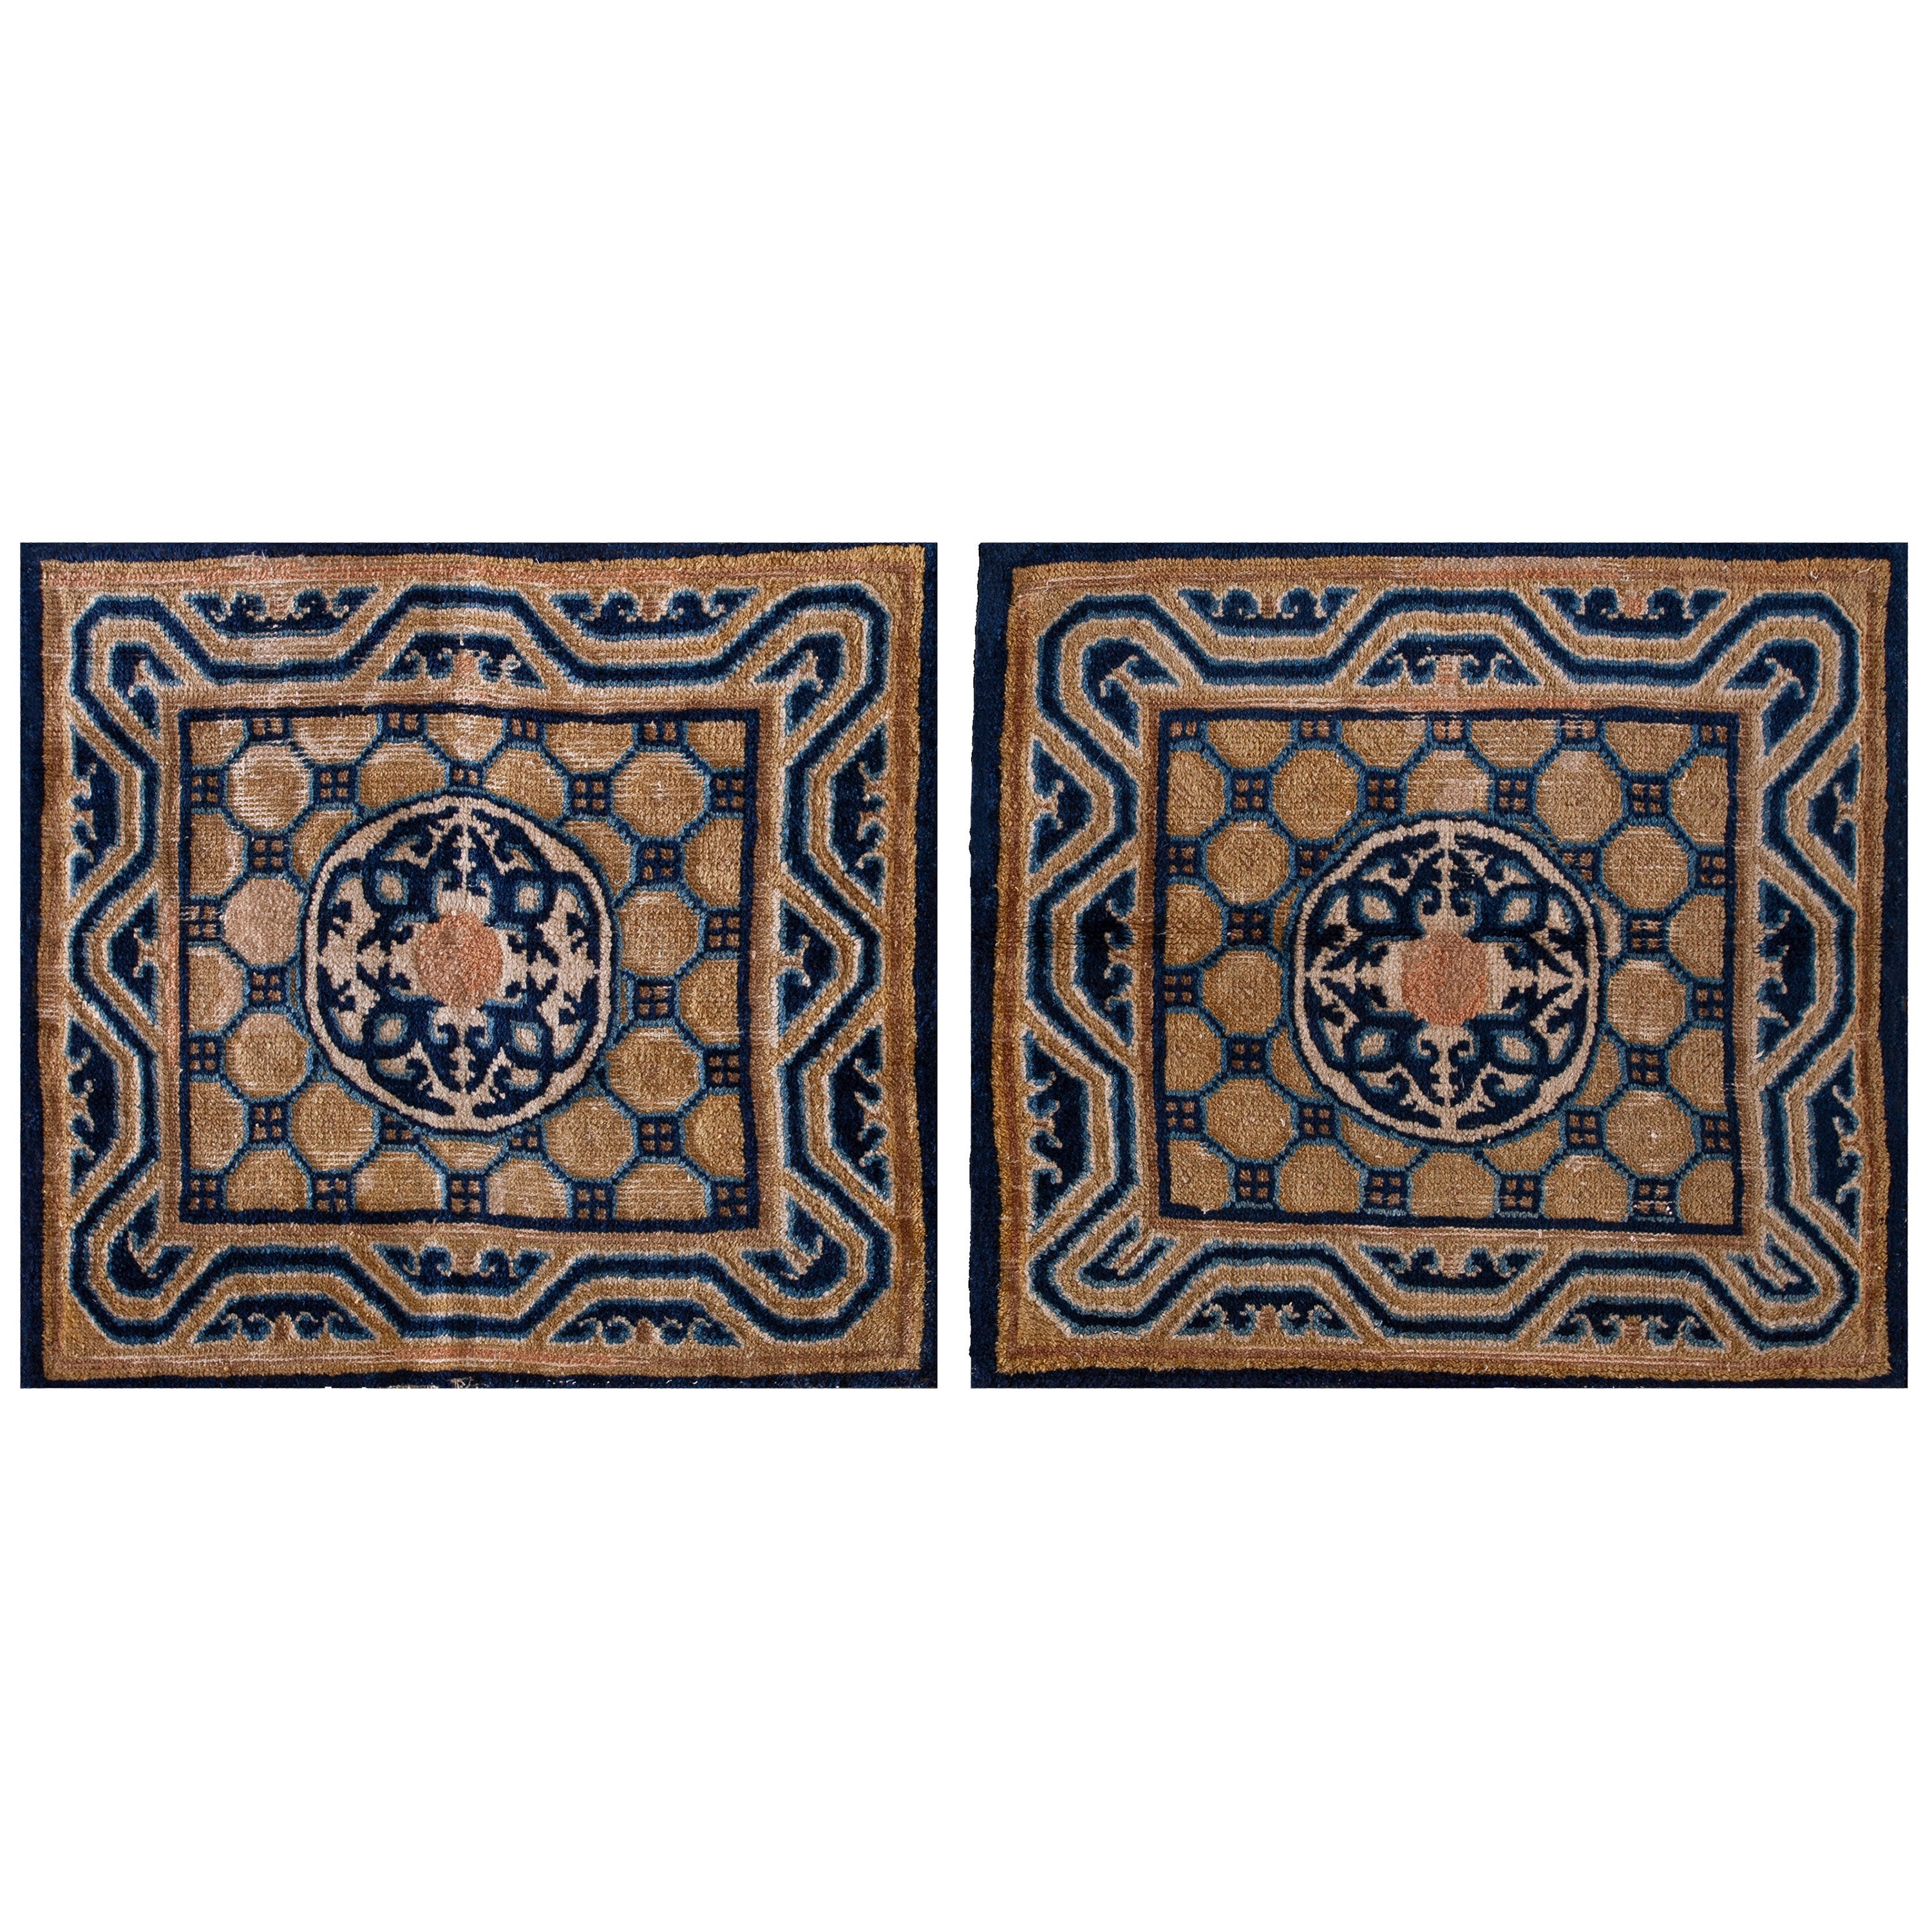 1820s Chinese and East Asian Rugs